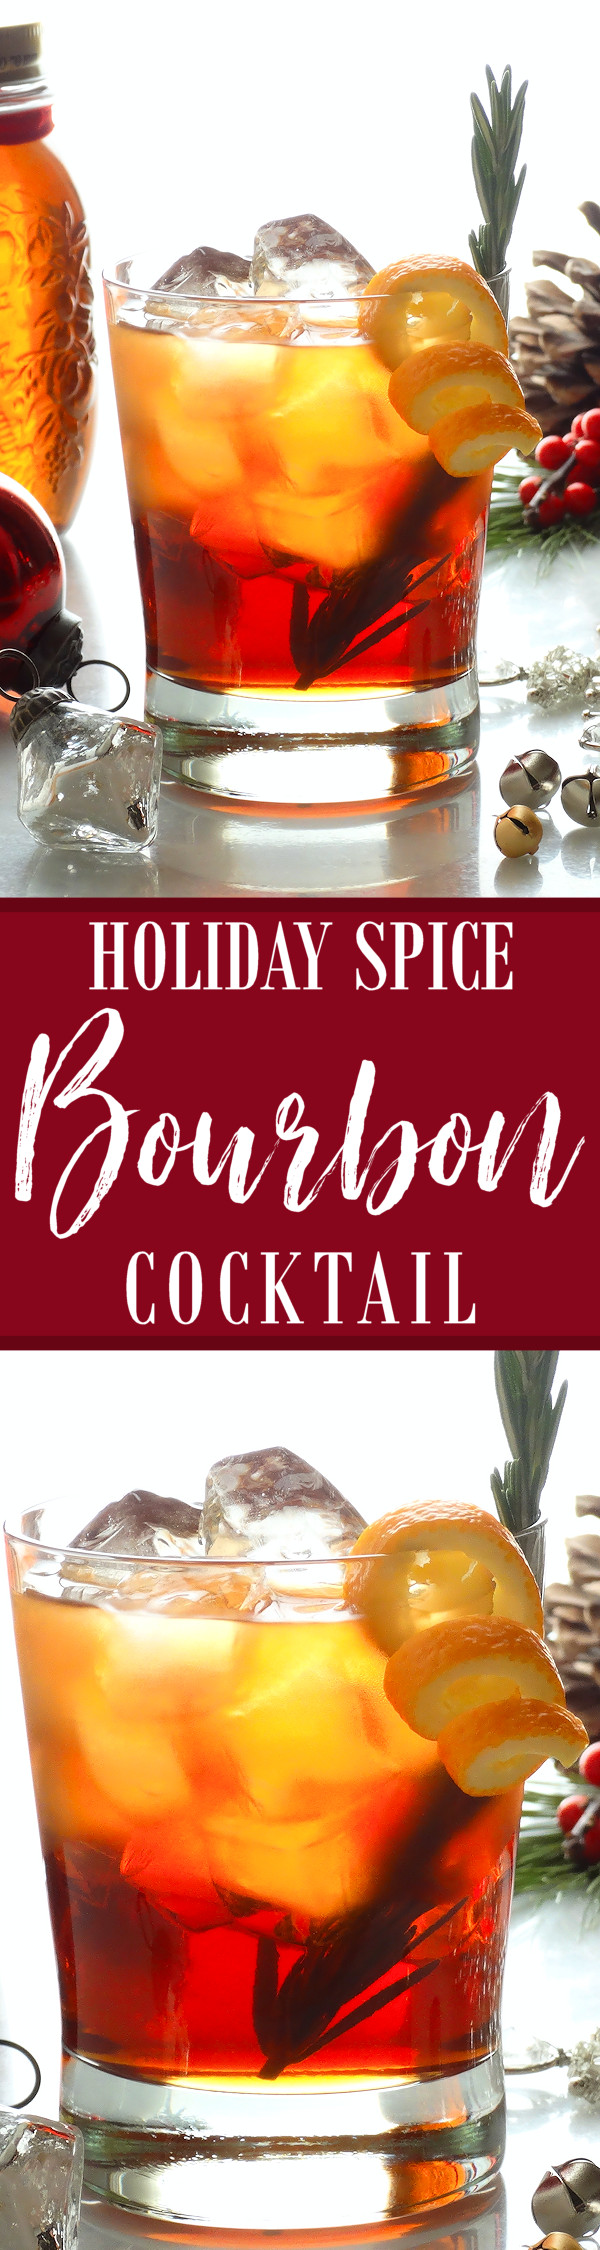 Bourbon Christmas Drinks
 Christmas in Connecticut Holiday Spice Bourbon Cocktail